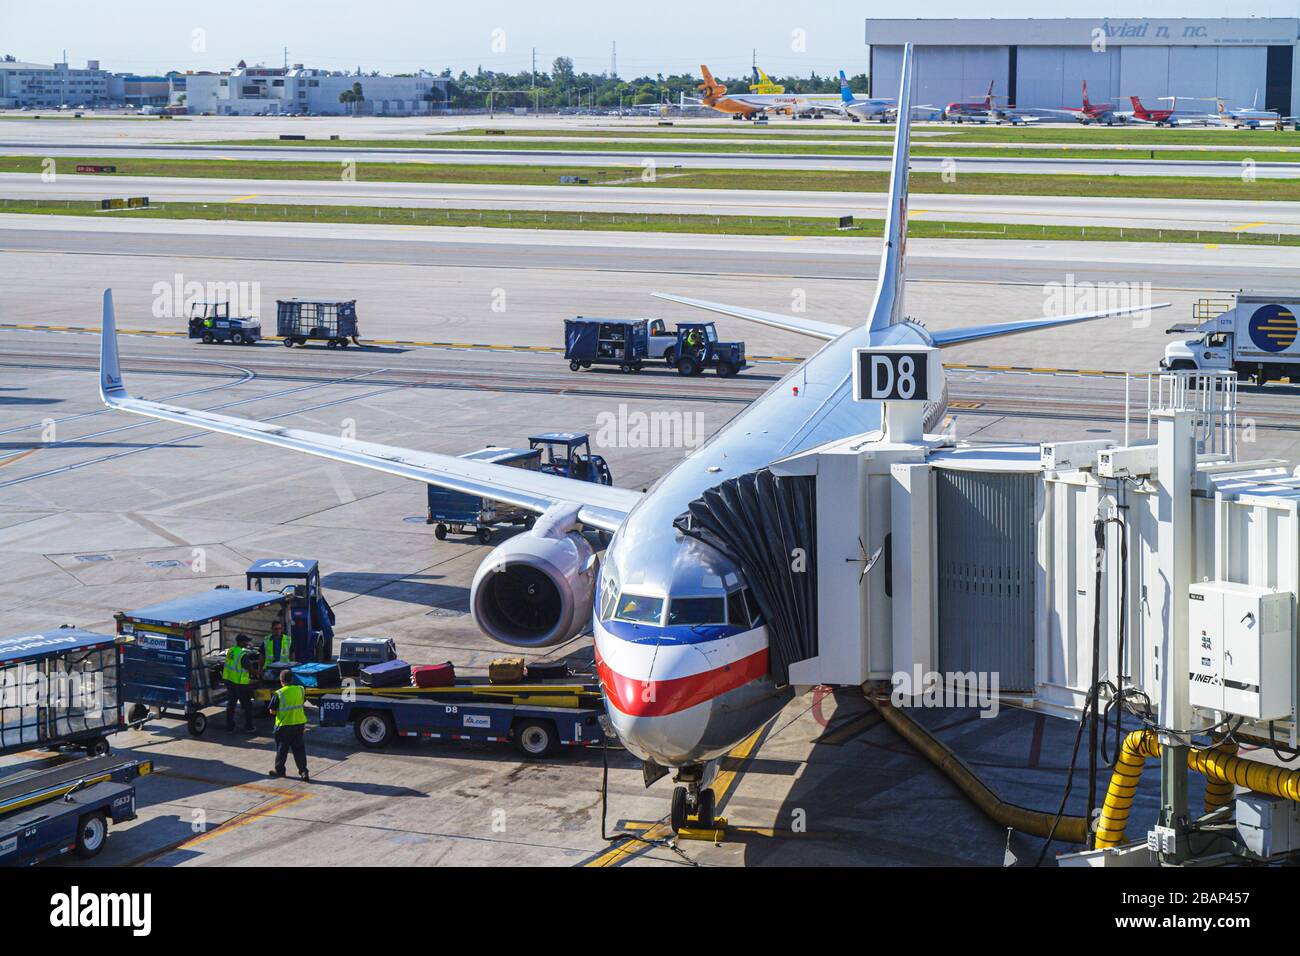 Miami Florida International Airport MIA,American Airlines,commercial airliner airplane plane aircraft aeroplane,plane,gate,ground crew,FL110504004 Stock Photo